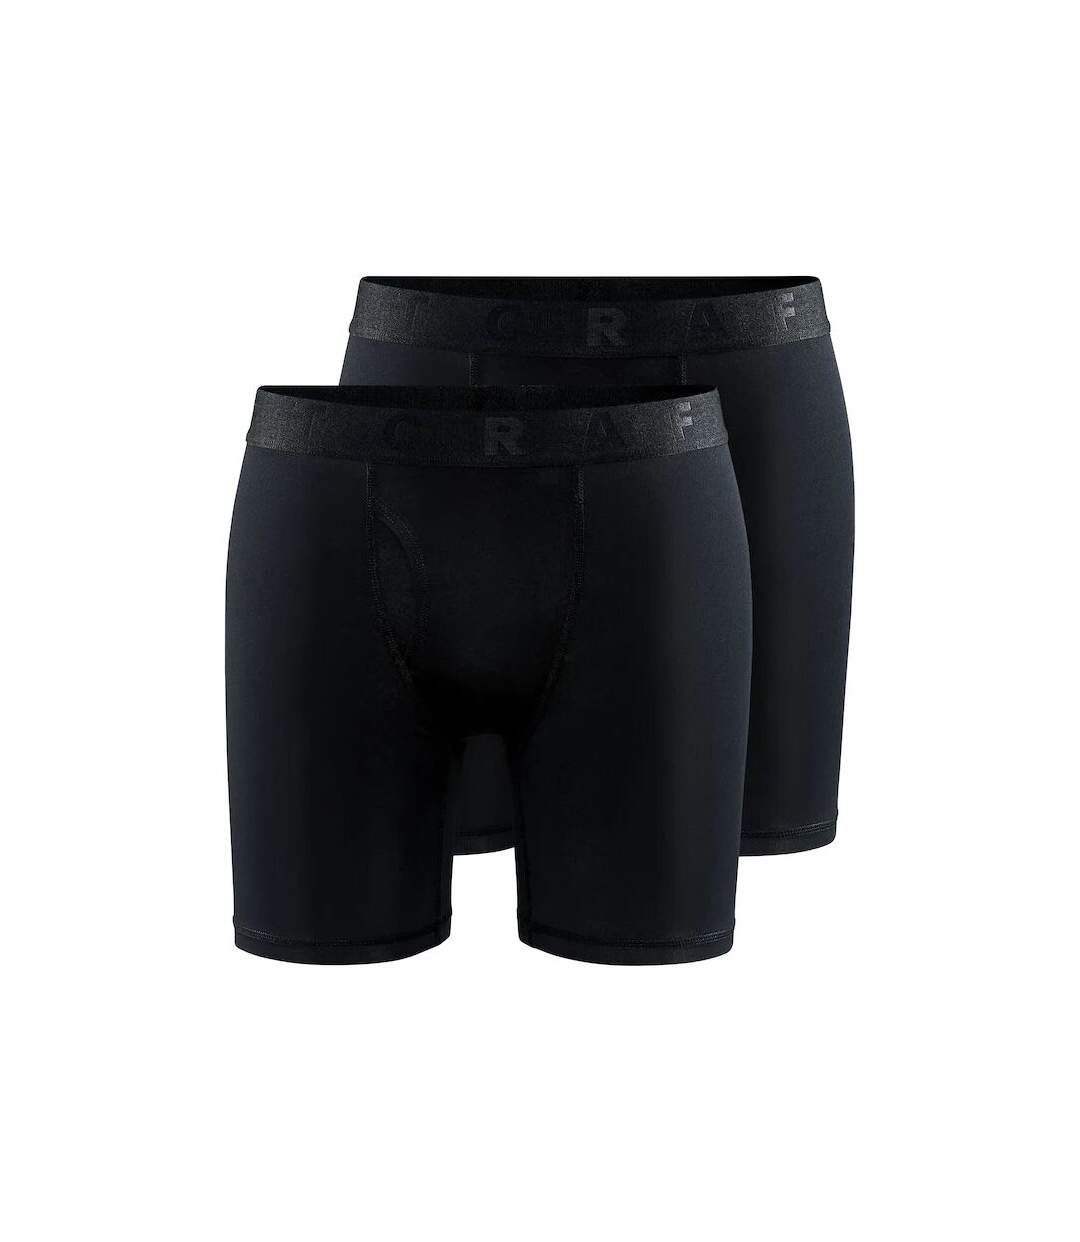 Craft Mens Core Dry Boxer Shorts (Pack of 2) (Black)